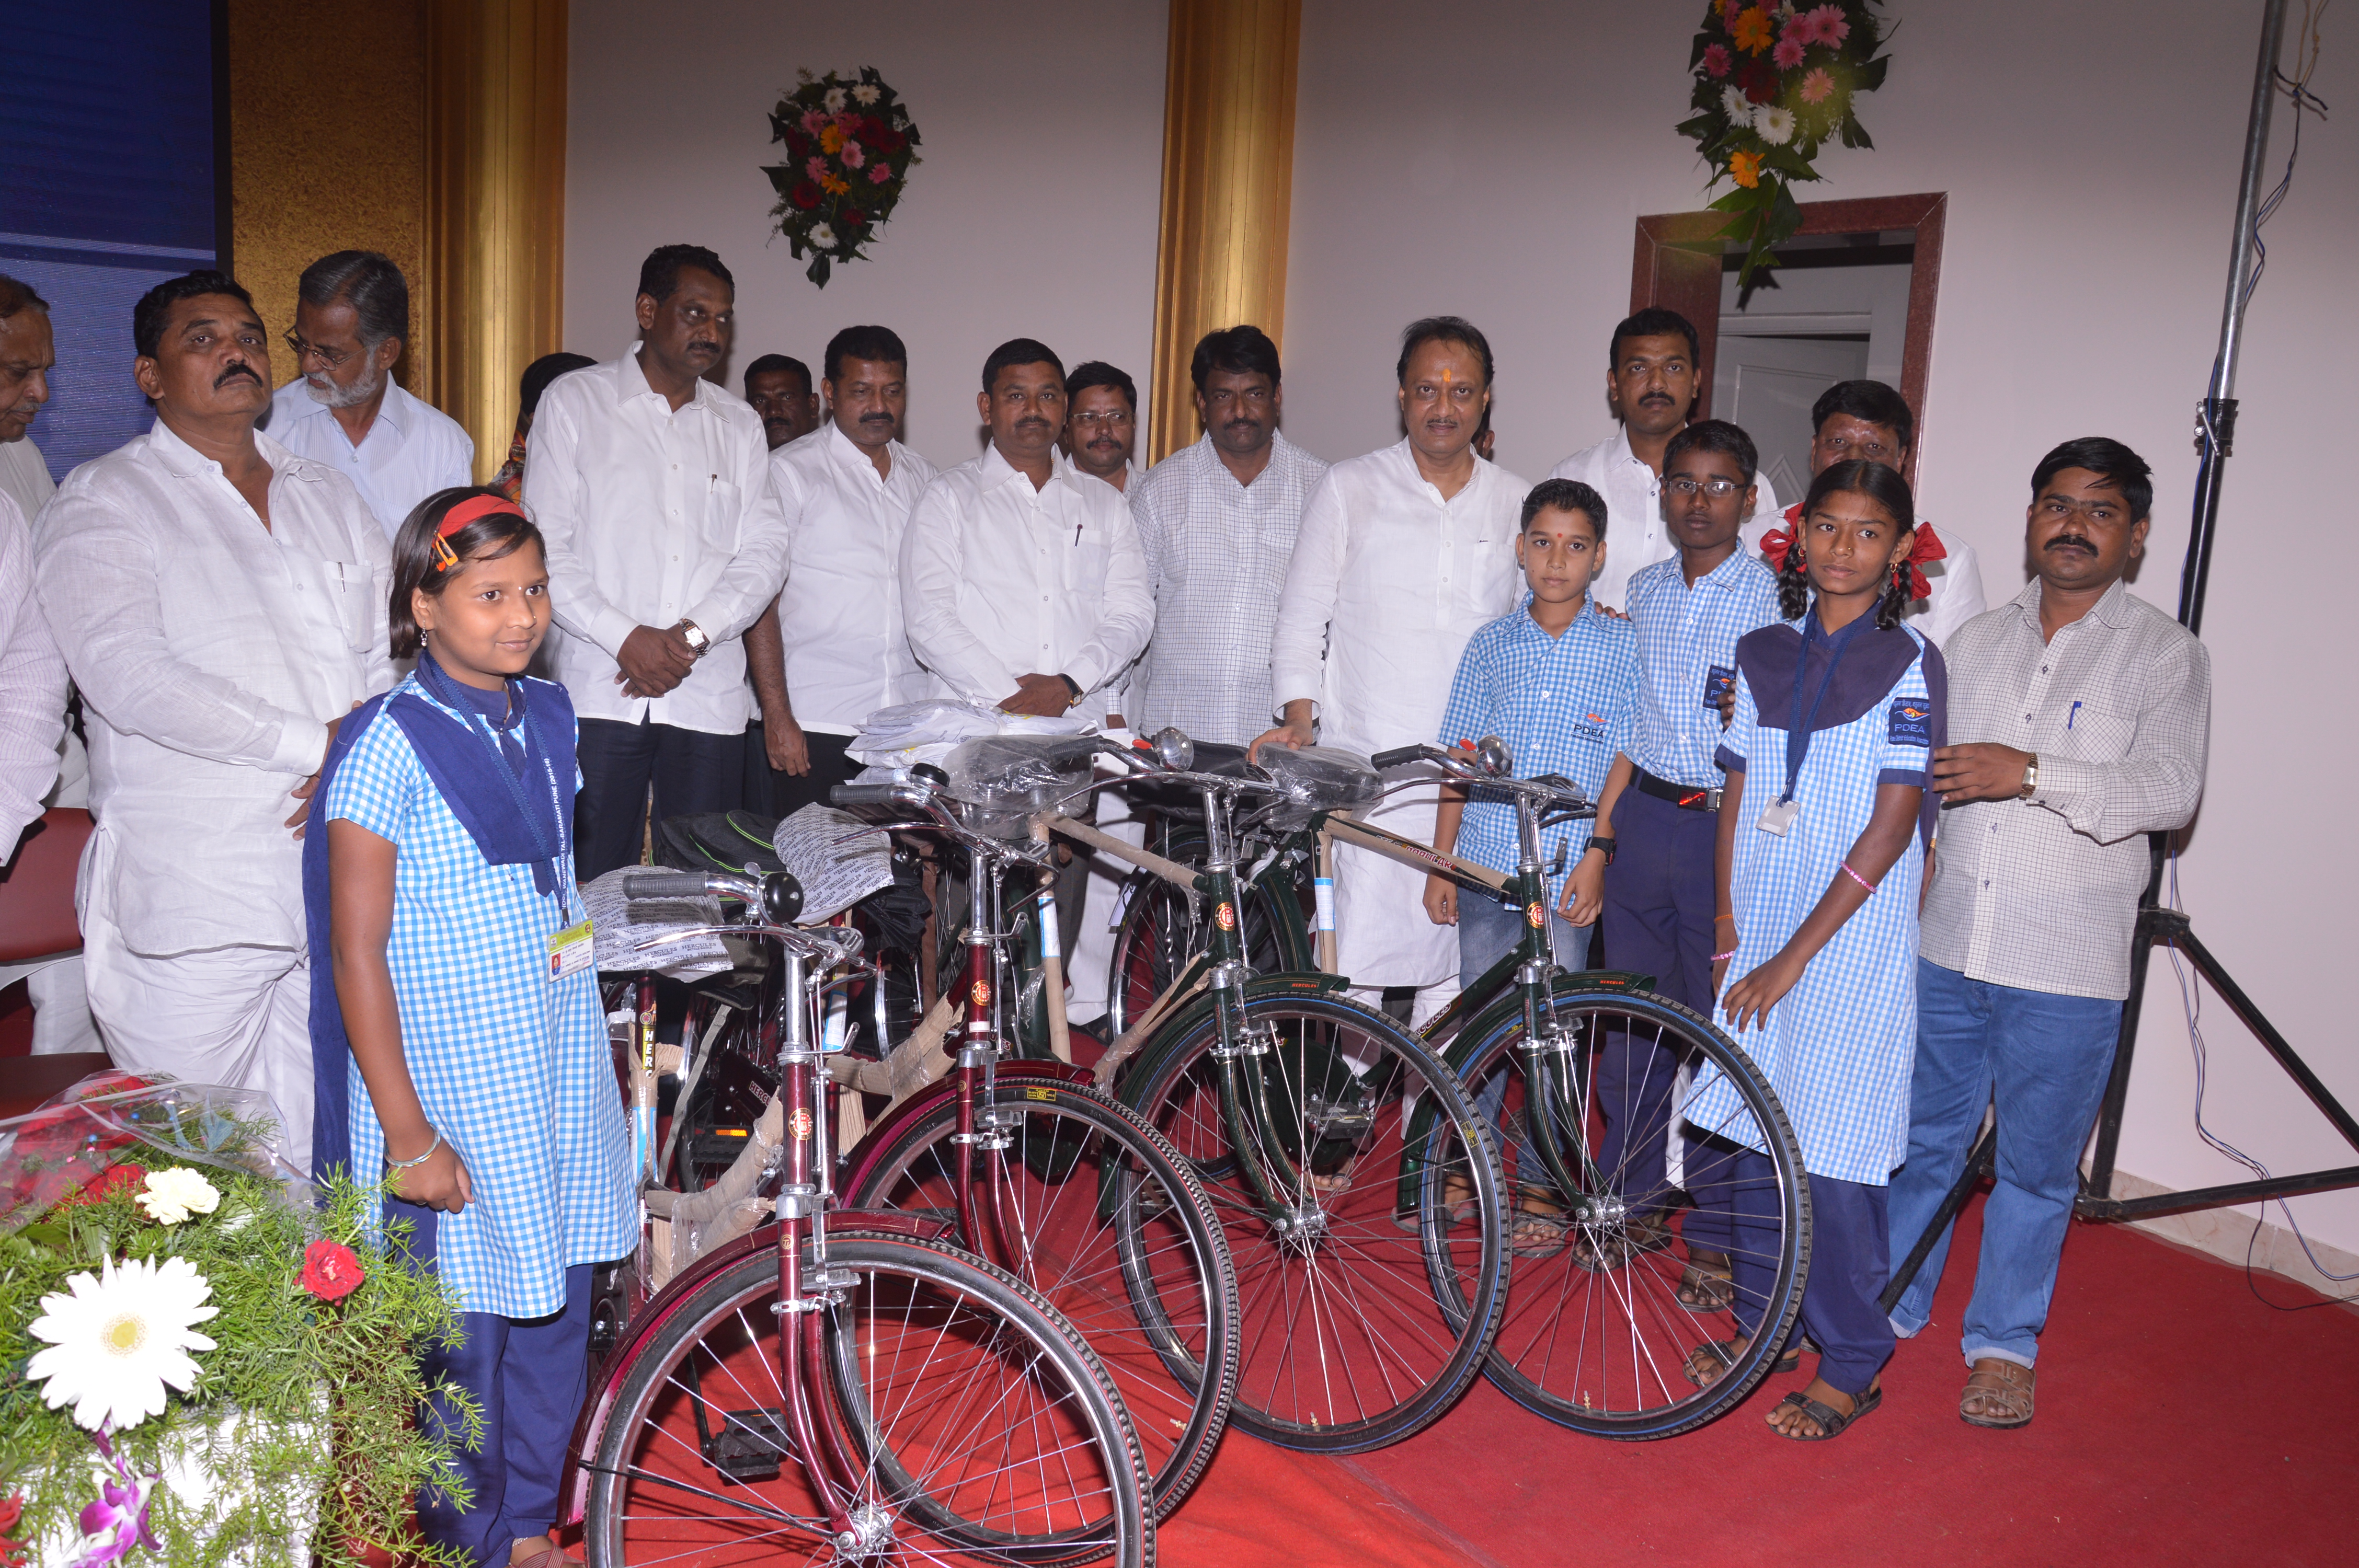 Distribution of educational material and bicycle to school students